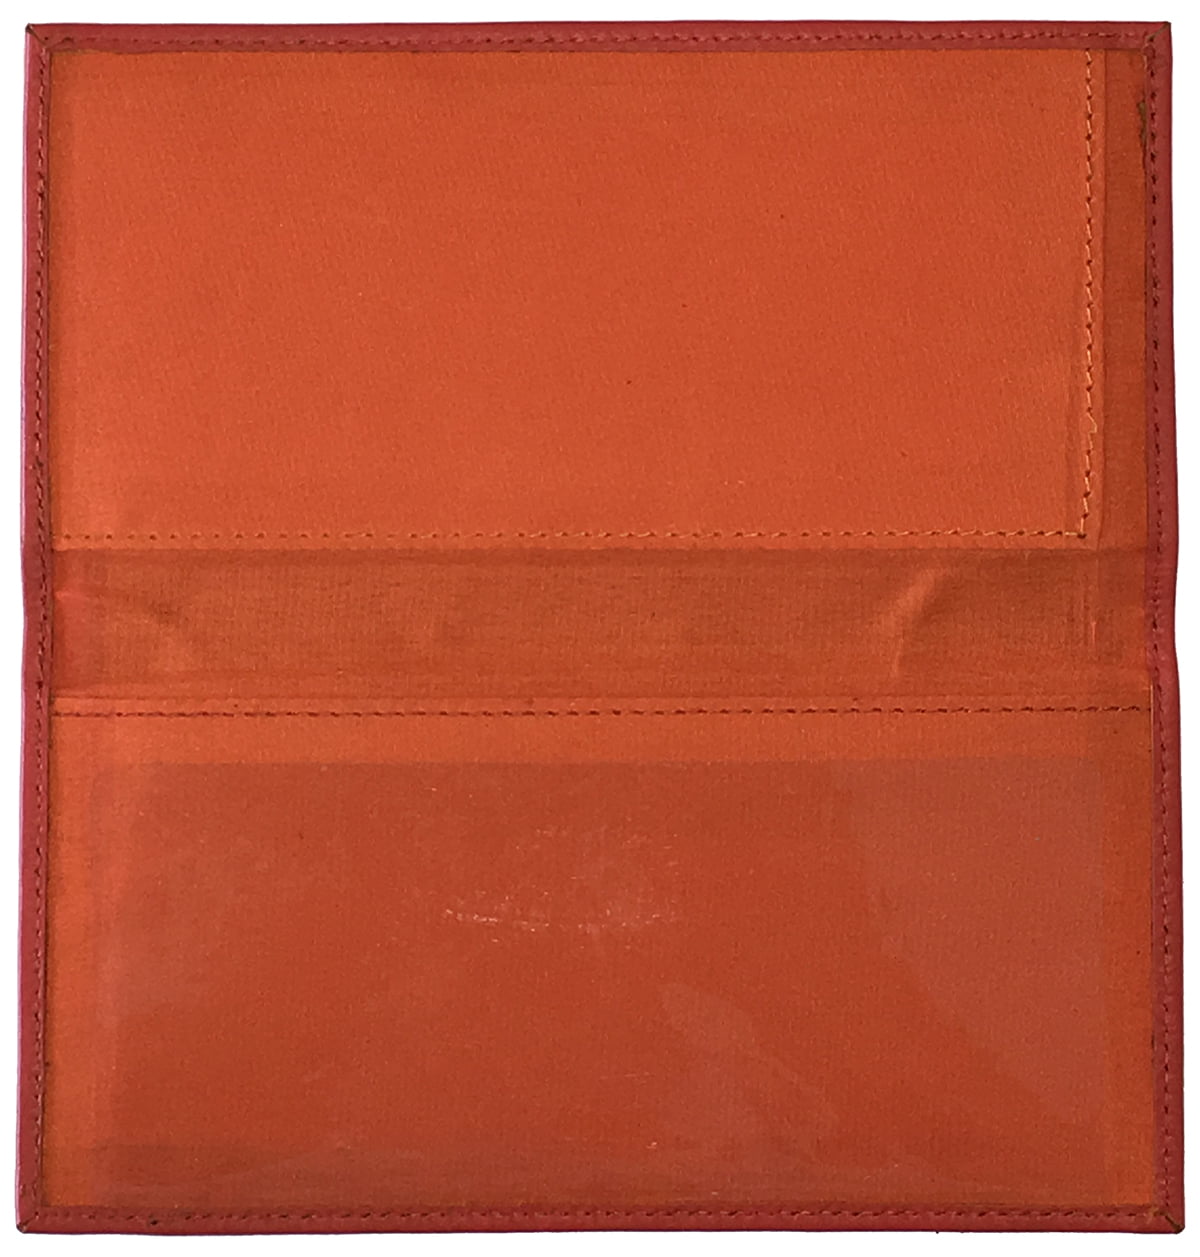 Buck Wear™ Fishing Leather Checkbook Cover